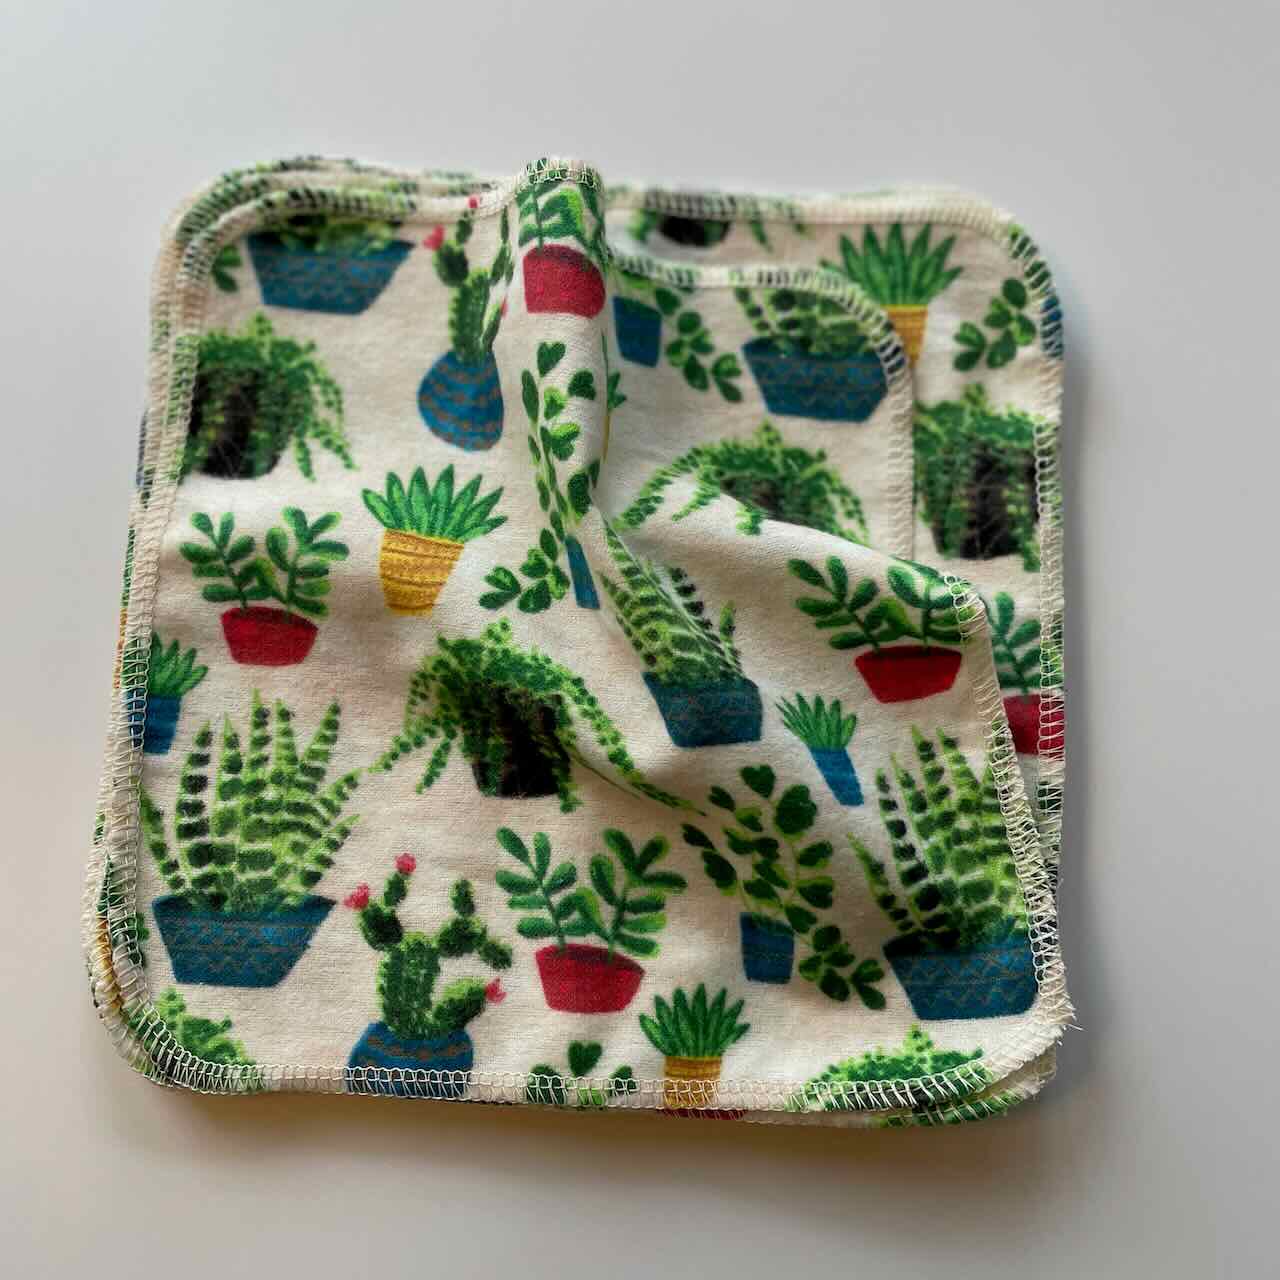 flatlay of a set of 10 reusable cloth wipes, with vibrant cactus plants printed on the fabric.